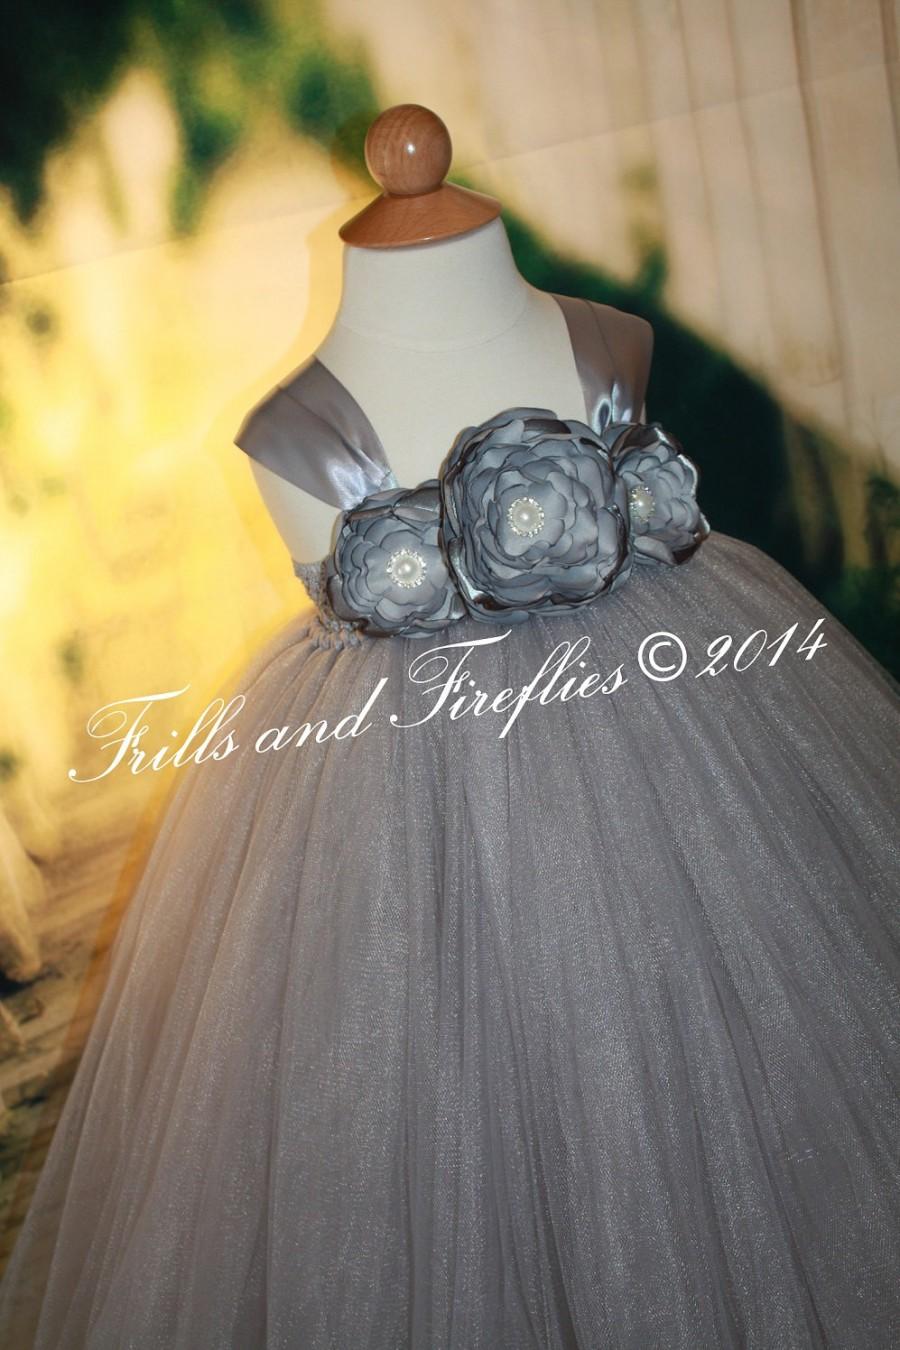 Mariage - Silver Gray/grey Flower girl Dress with Satin Flowers and Gray Satin Ribbon Shoulder Straps, Weddings, Birthdays 1t,2t,3t,4t,5t, 6, 8, 10